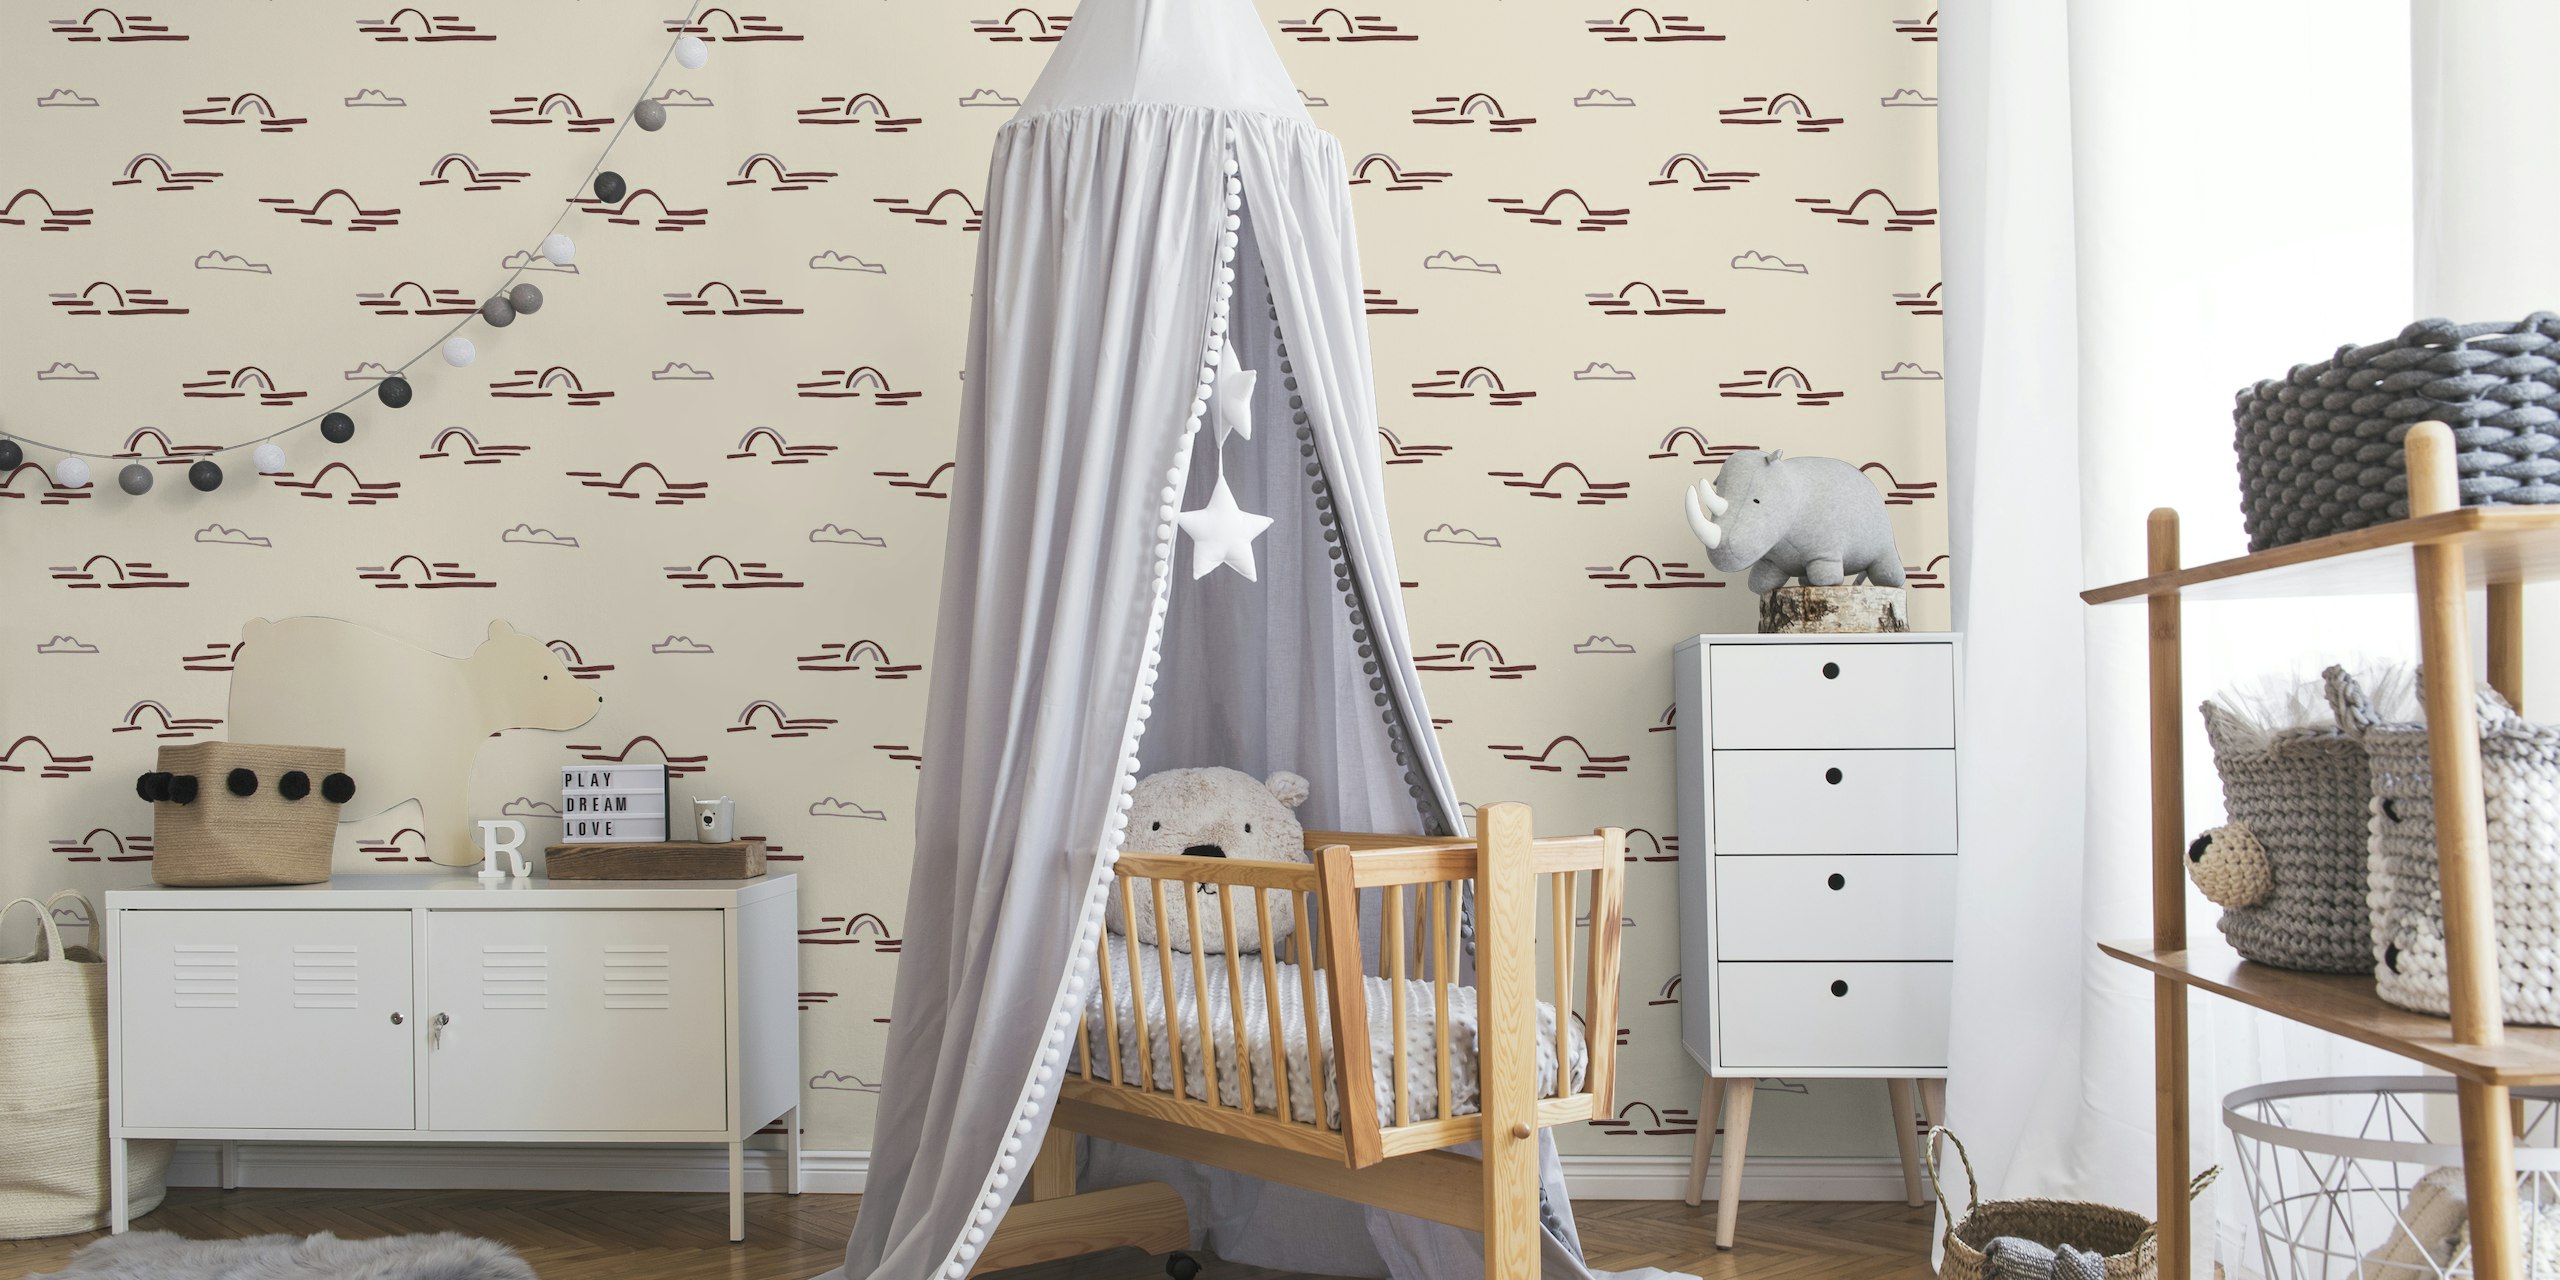 Rosy Sunlit Daydreams - Whimsical Kids Play wallpaper